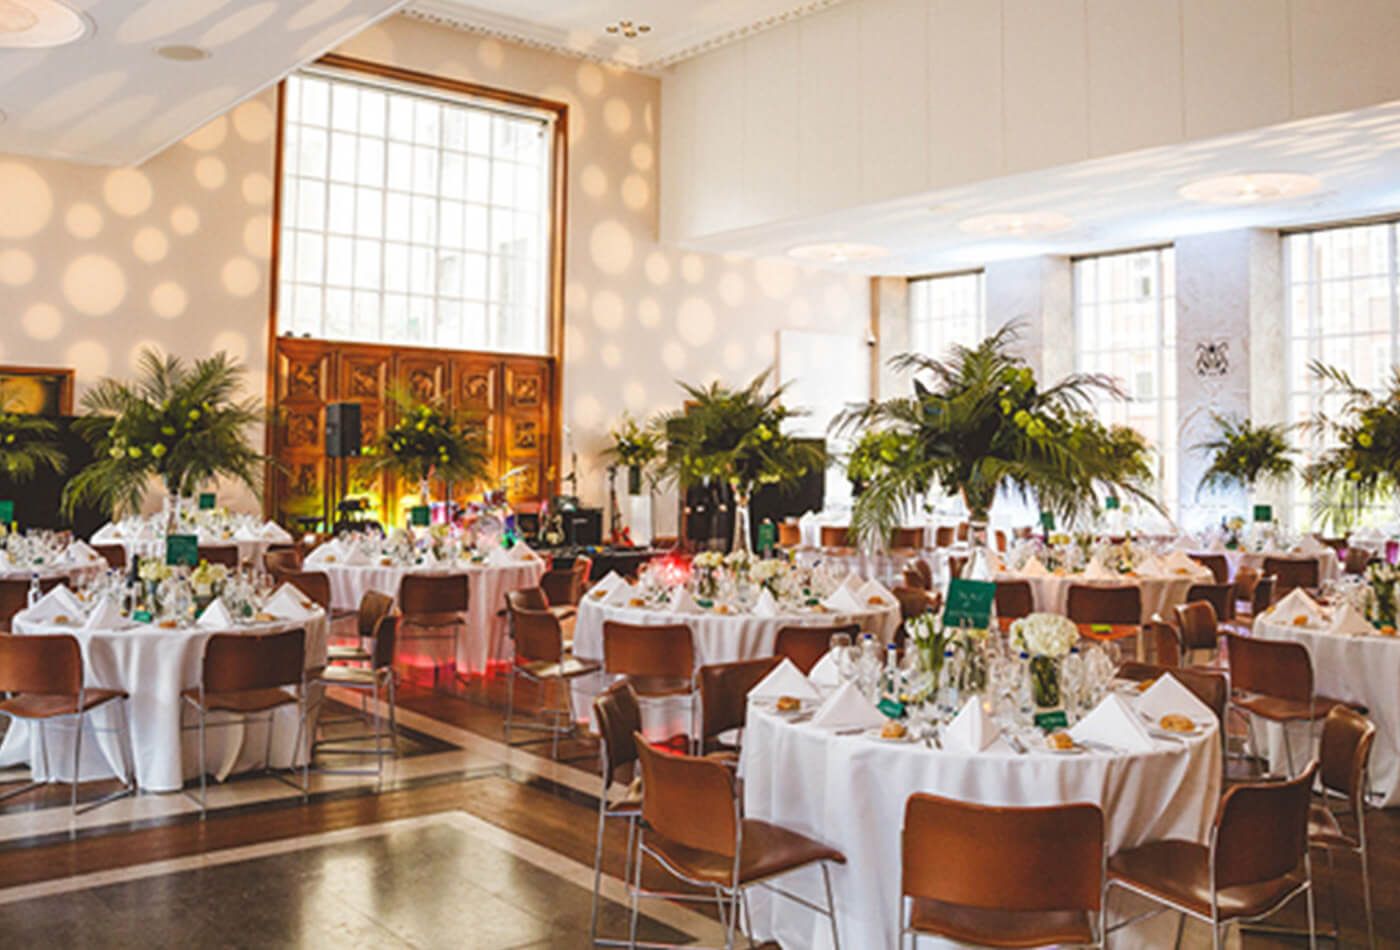 White wedding with brown leather chairs, tall plants and abstract patterns projected onto the wall